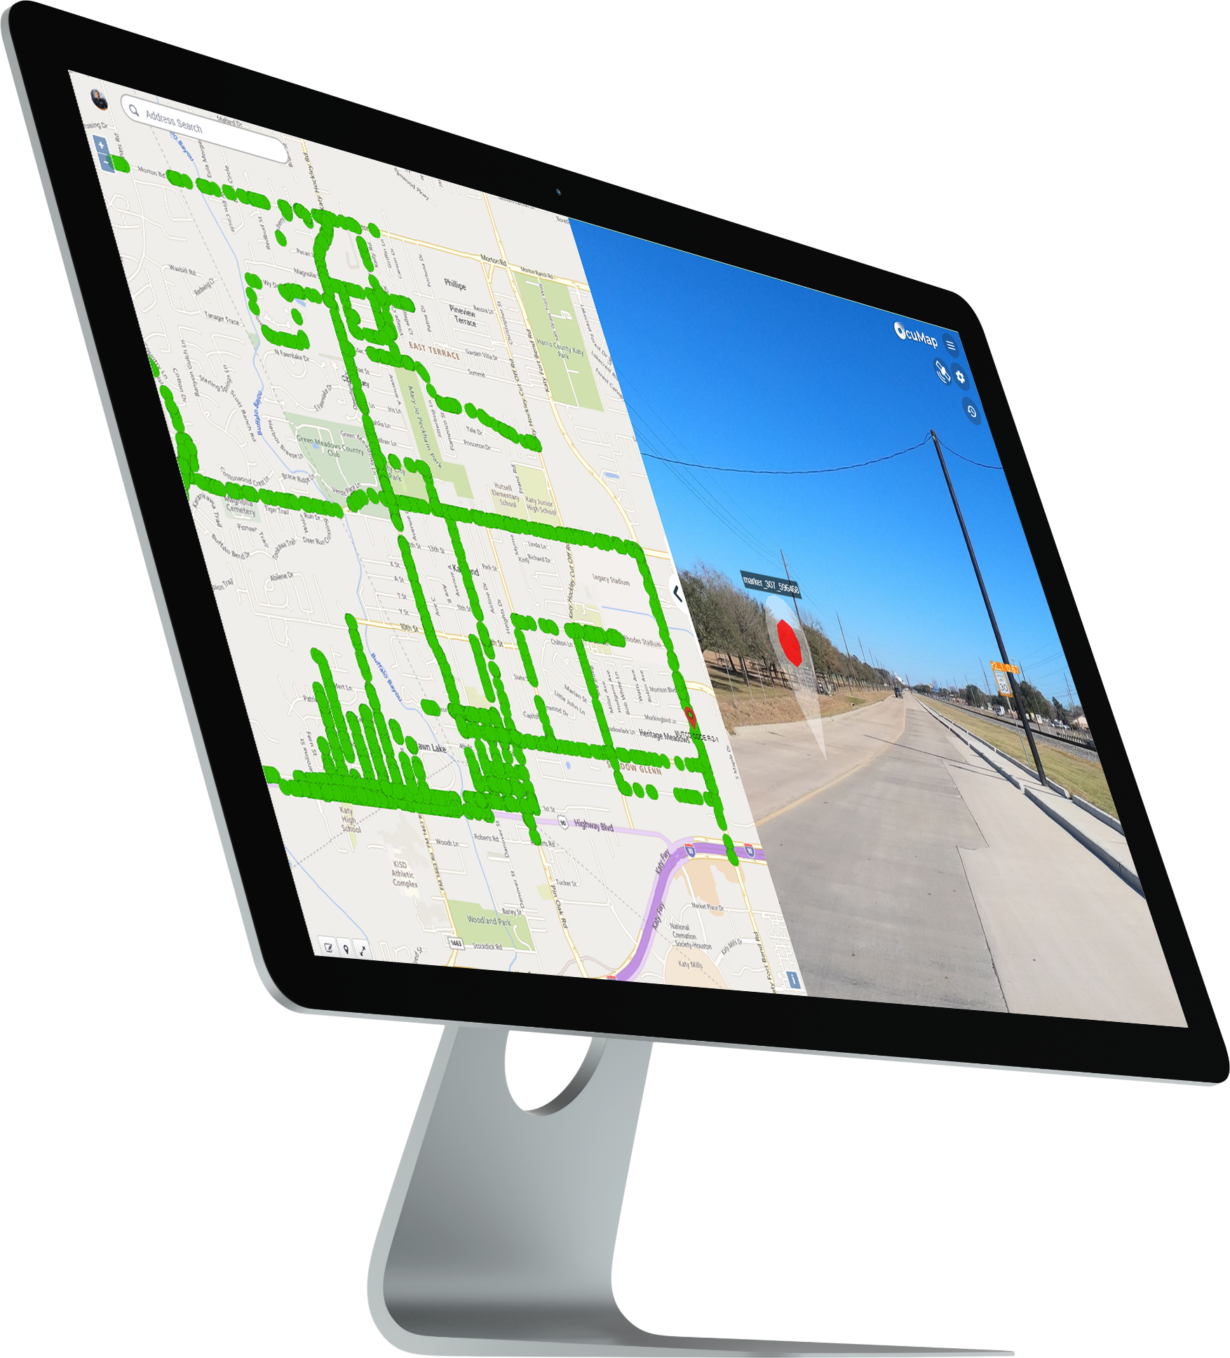 3D Mapping Software